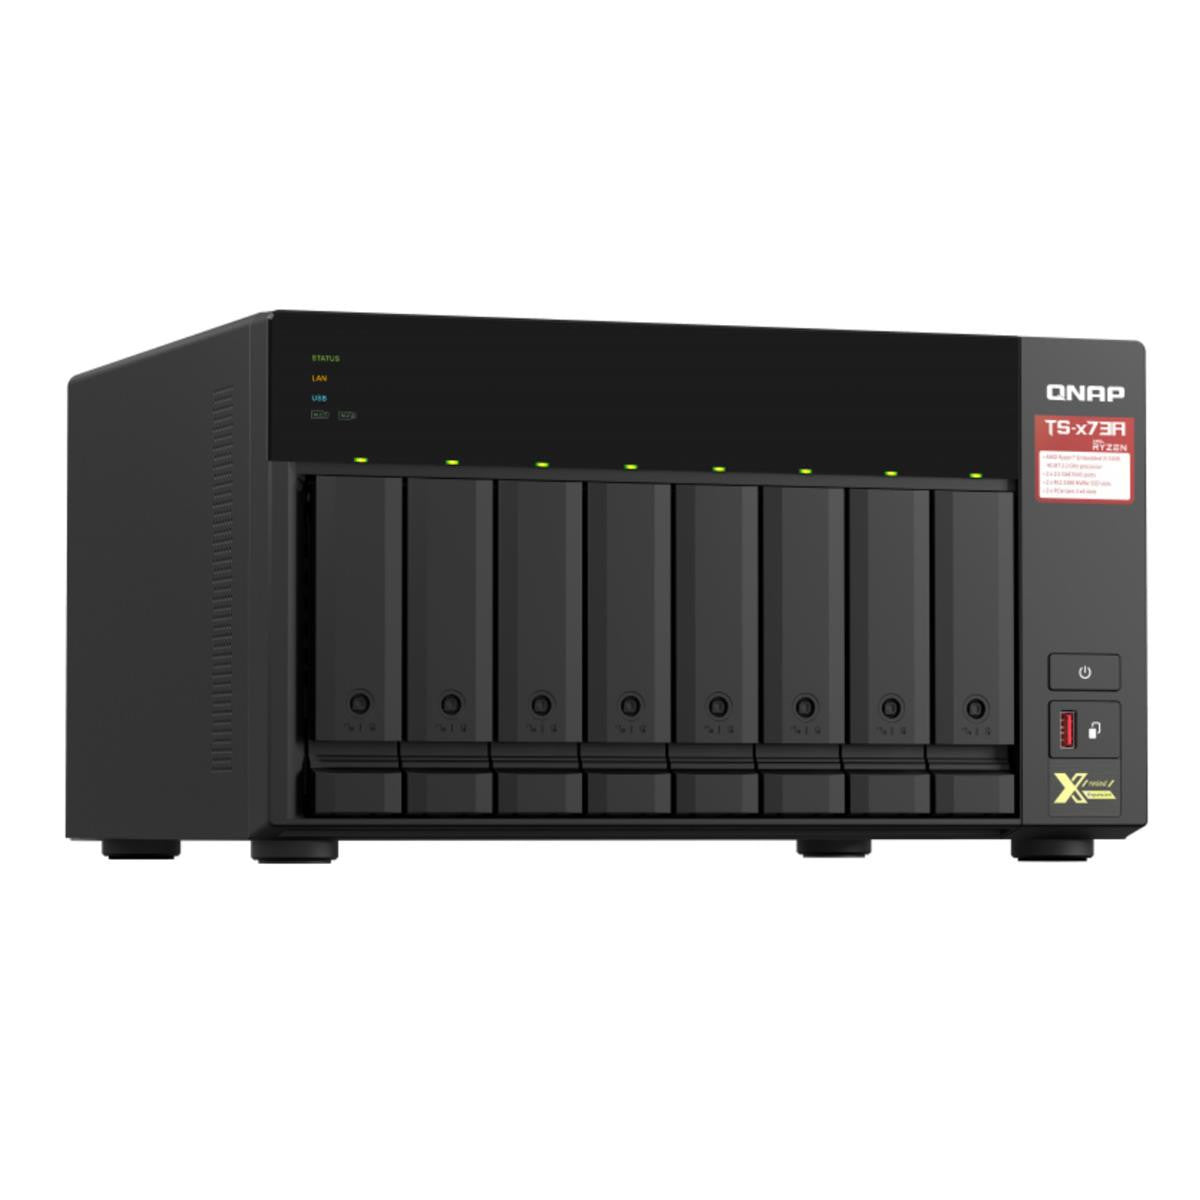 QNAP TS-873A 8-BAY NAS with 32GB DDR4 RAM and 48TB (8x6TB) Western Digital RED PLUS Drives Fully Assembled and Tested